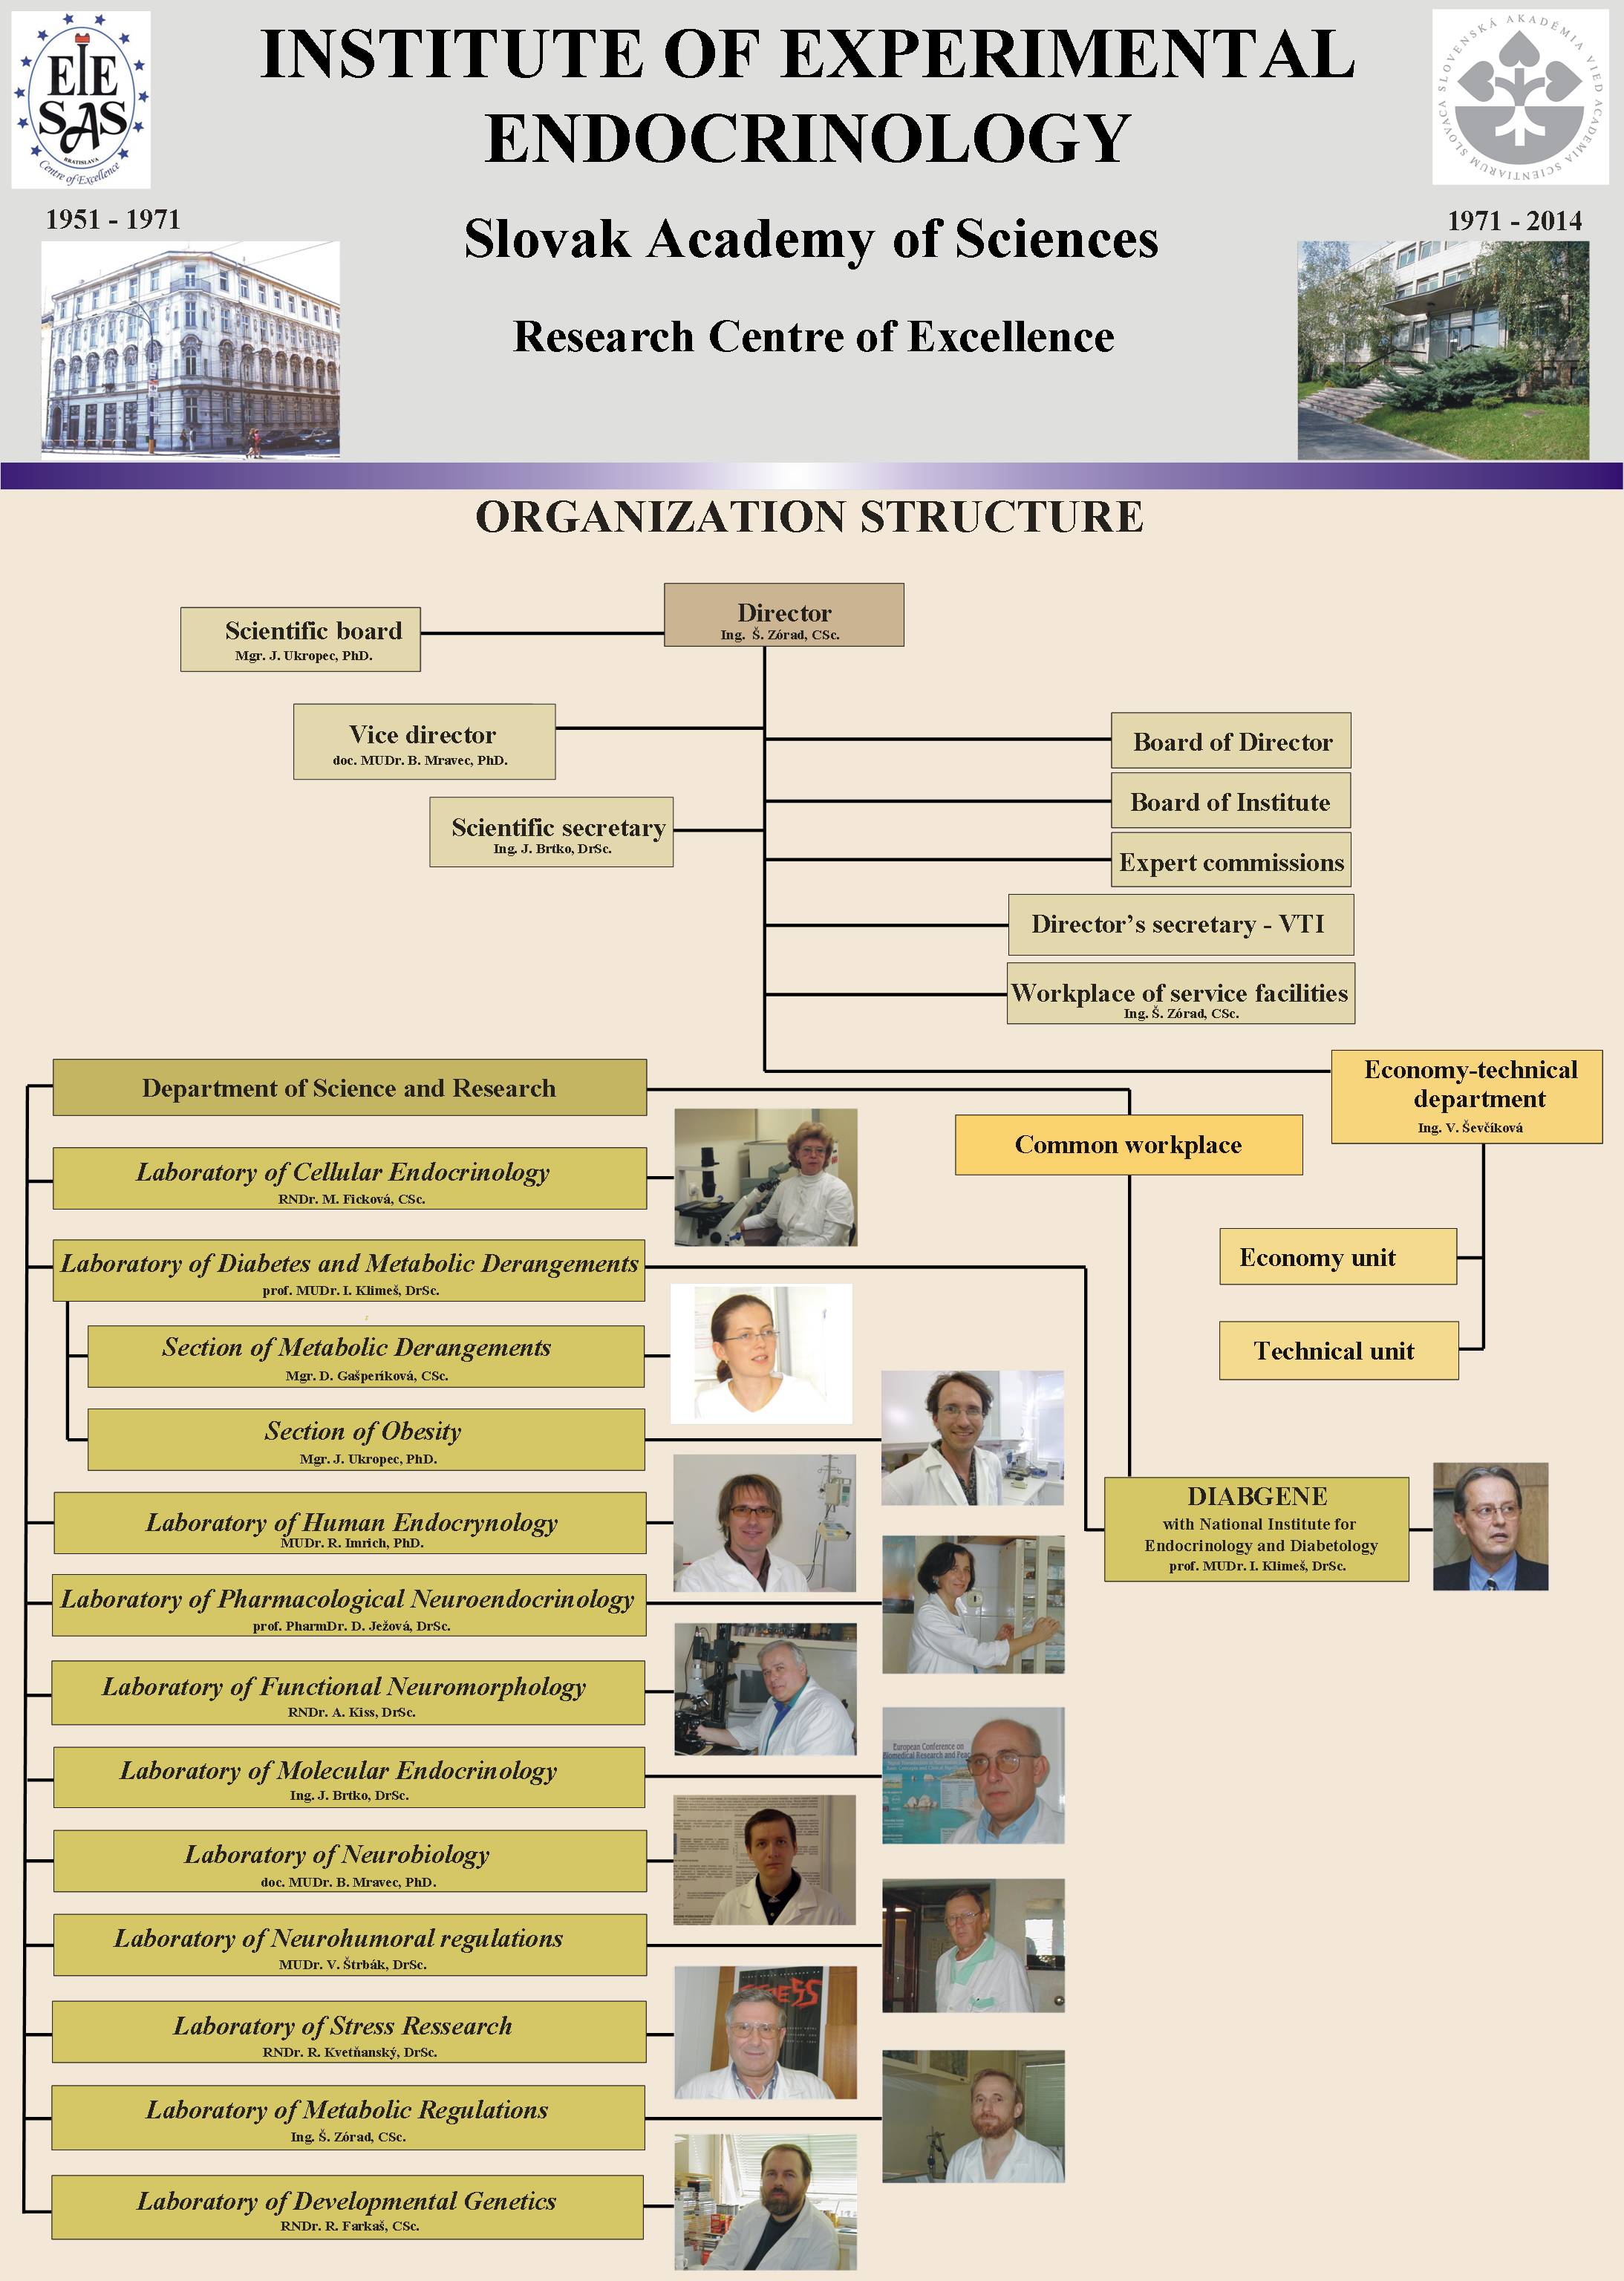 Organization structure of IEE